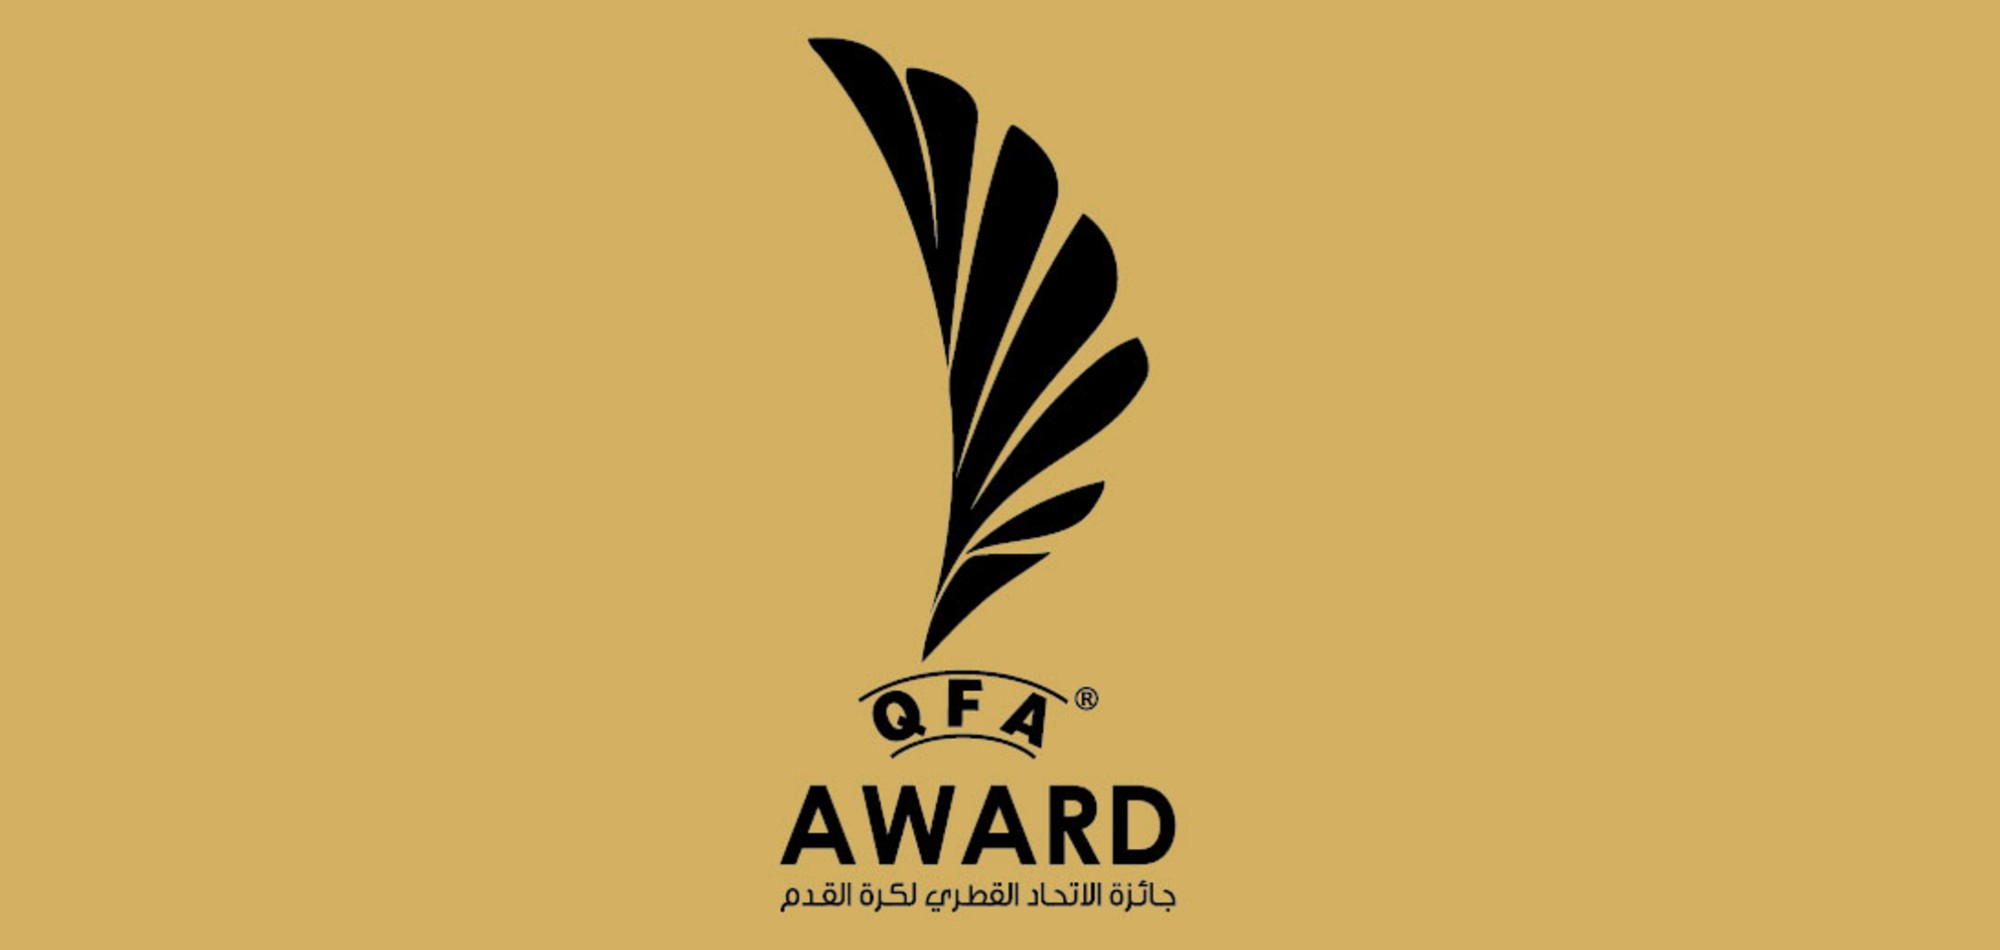 Phase 1 of voting now open for 2020-21 QFA Awards